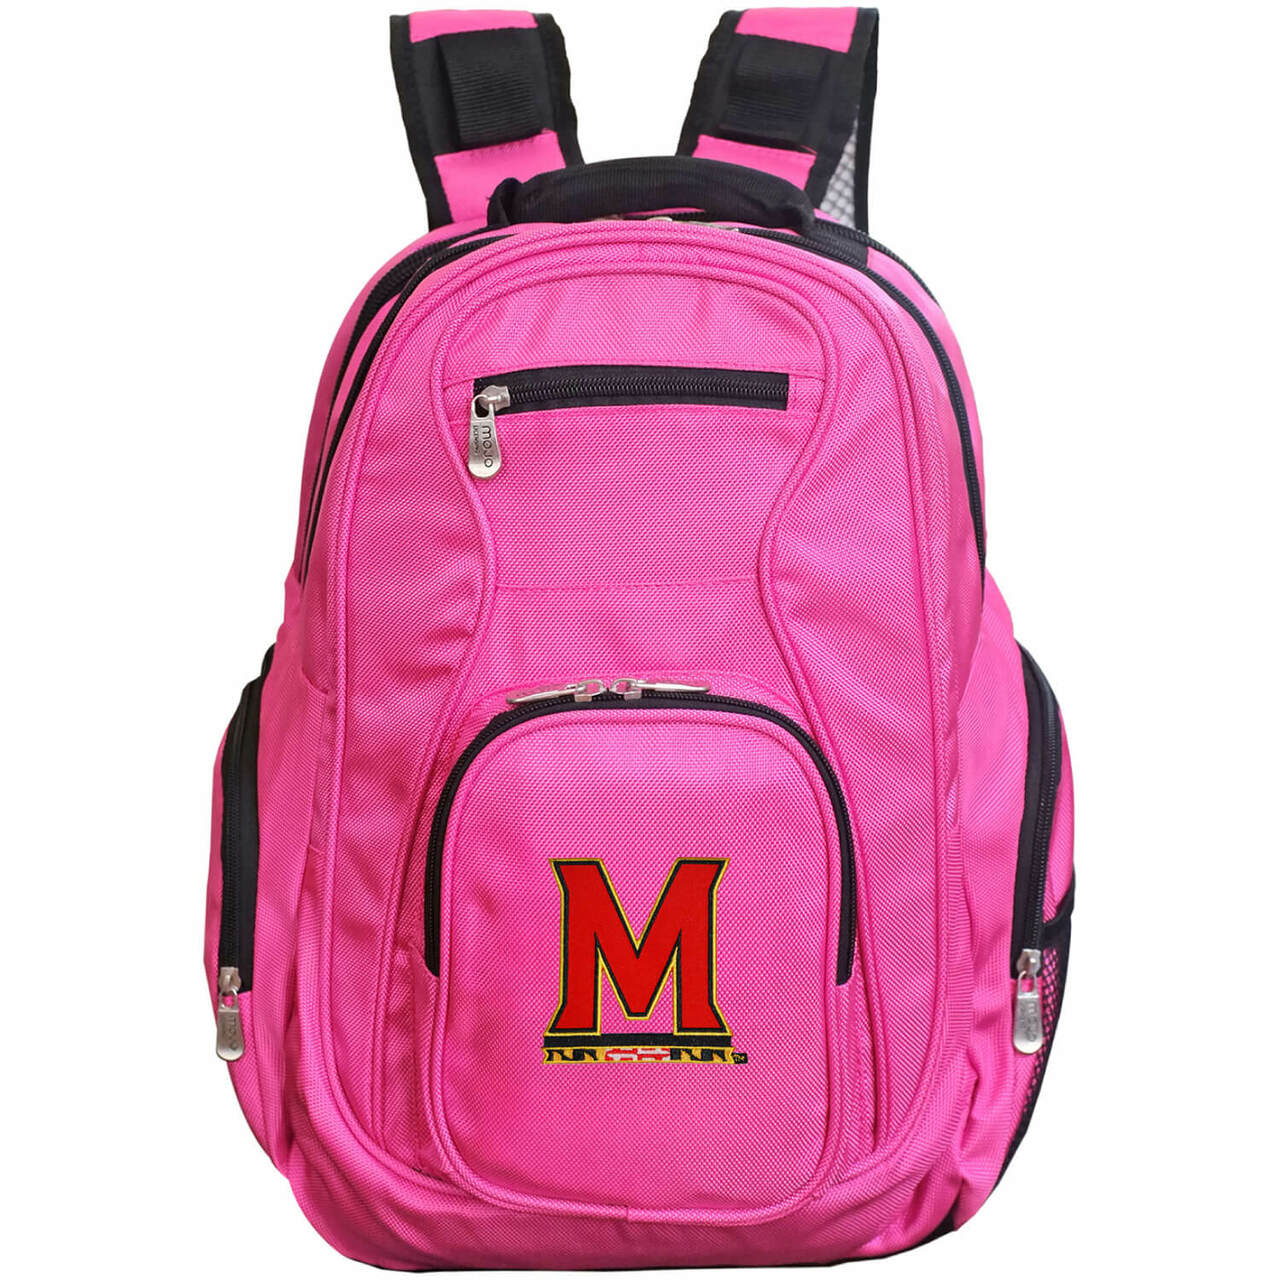 Maryland Terrapins Laptop Backpack Pink